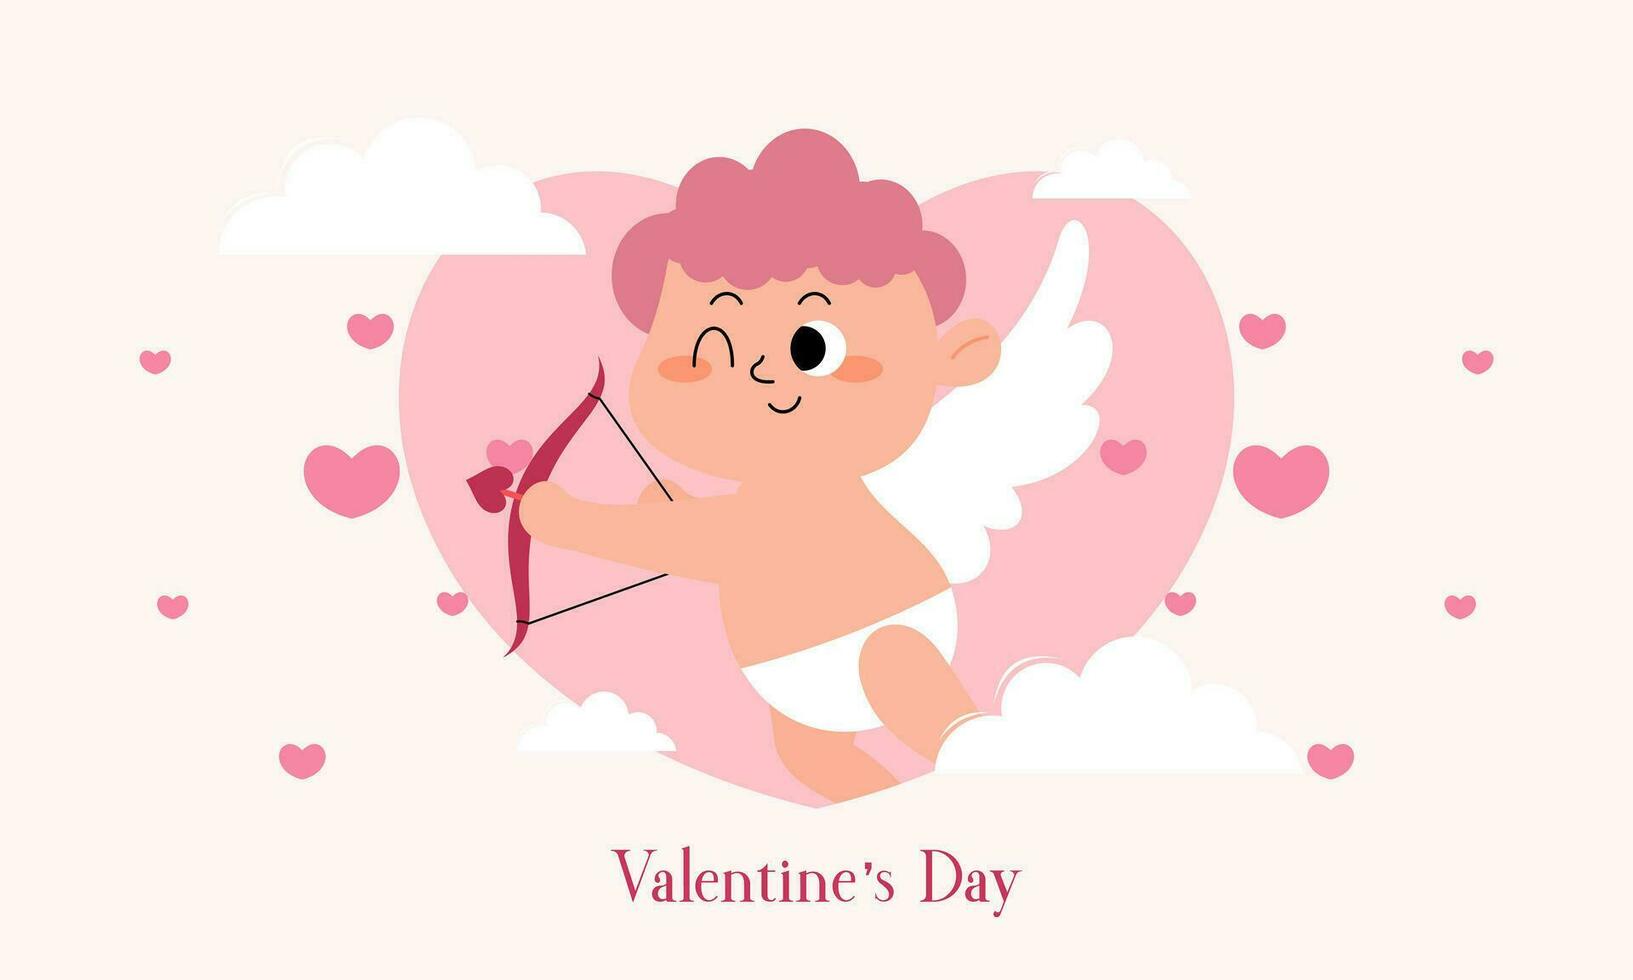 Valentine's Day Illustration with Cute Cupid Isolated on the Sky Clouds Background vector